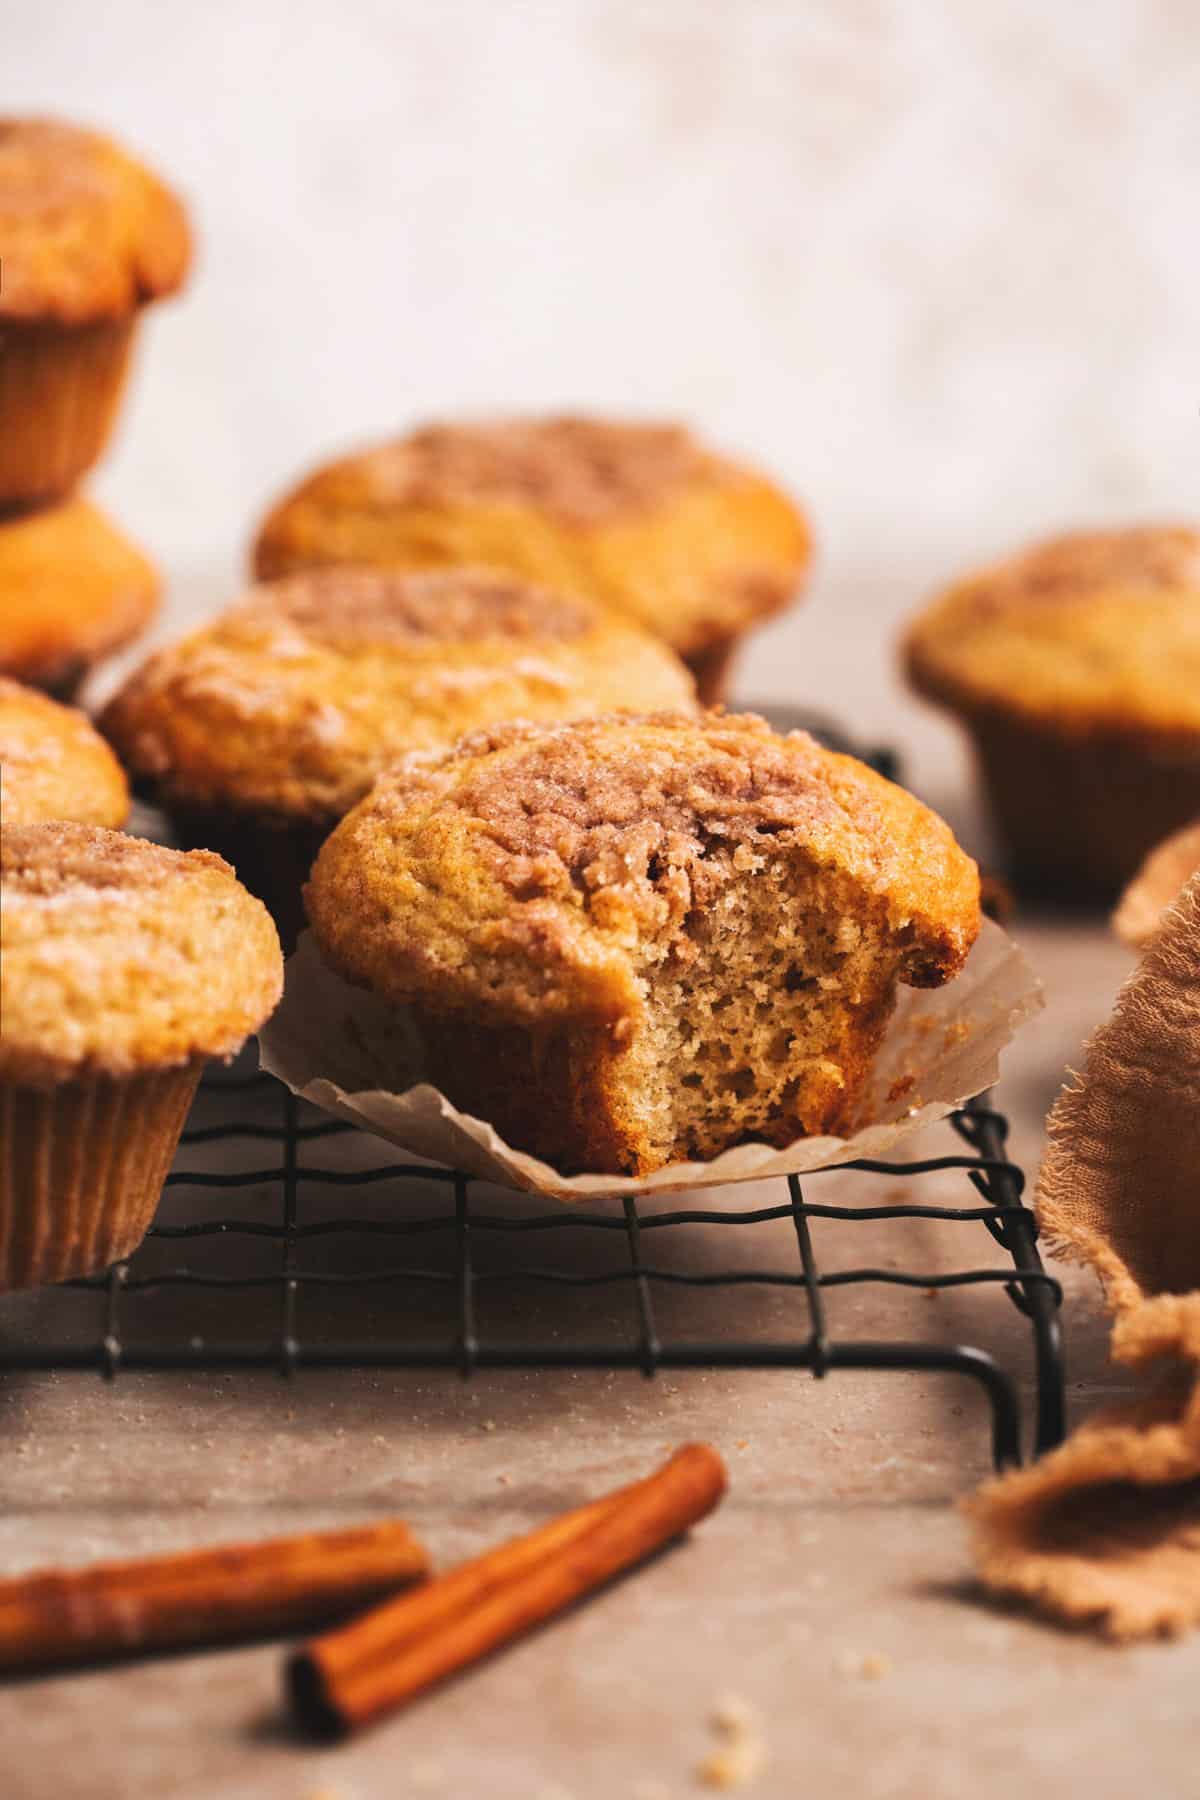 muffin with cinnamon topping and bite missing